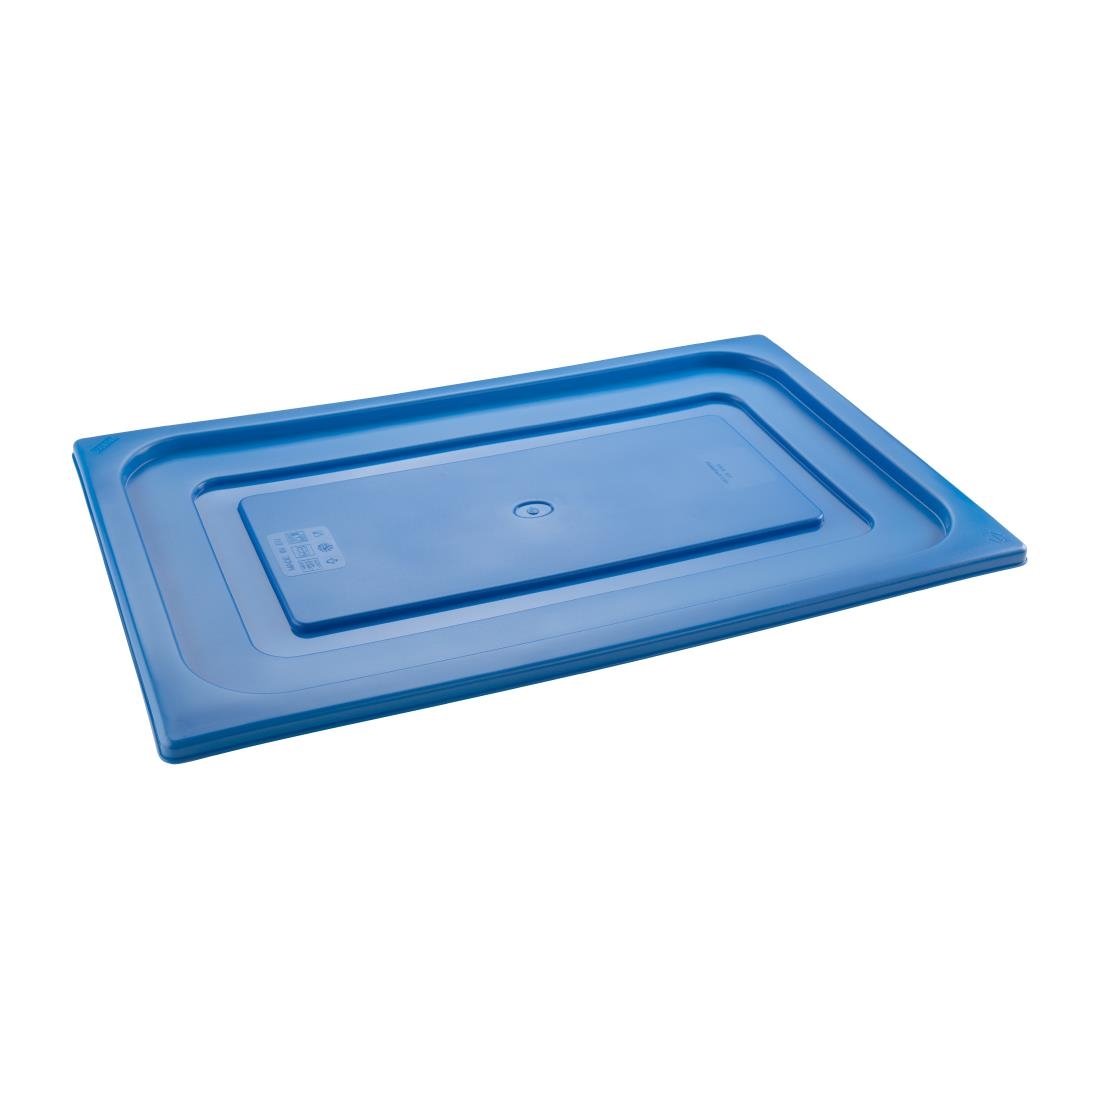 HT895 Pujadas Blue Polinorm Gastronorm Lid 1/2GN